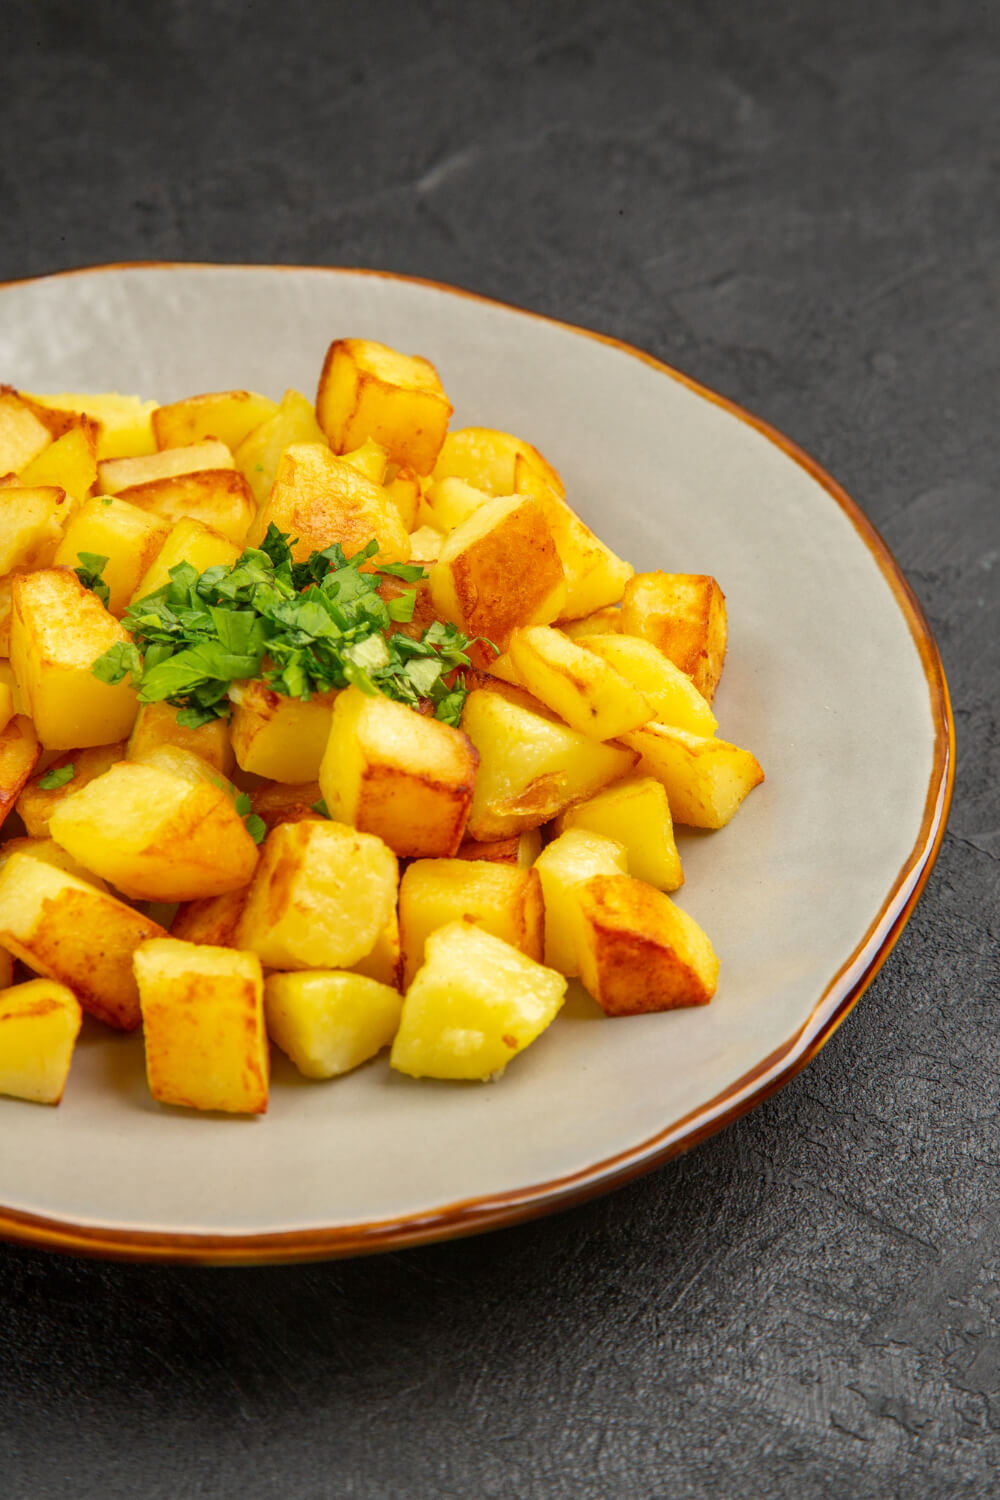 Discover how to make crispy and healthy air fryer sweet potato cubes with our simple recipe. Perfect for a quick, nutritious snack or side dish!